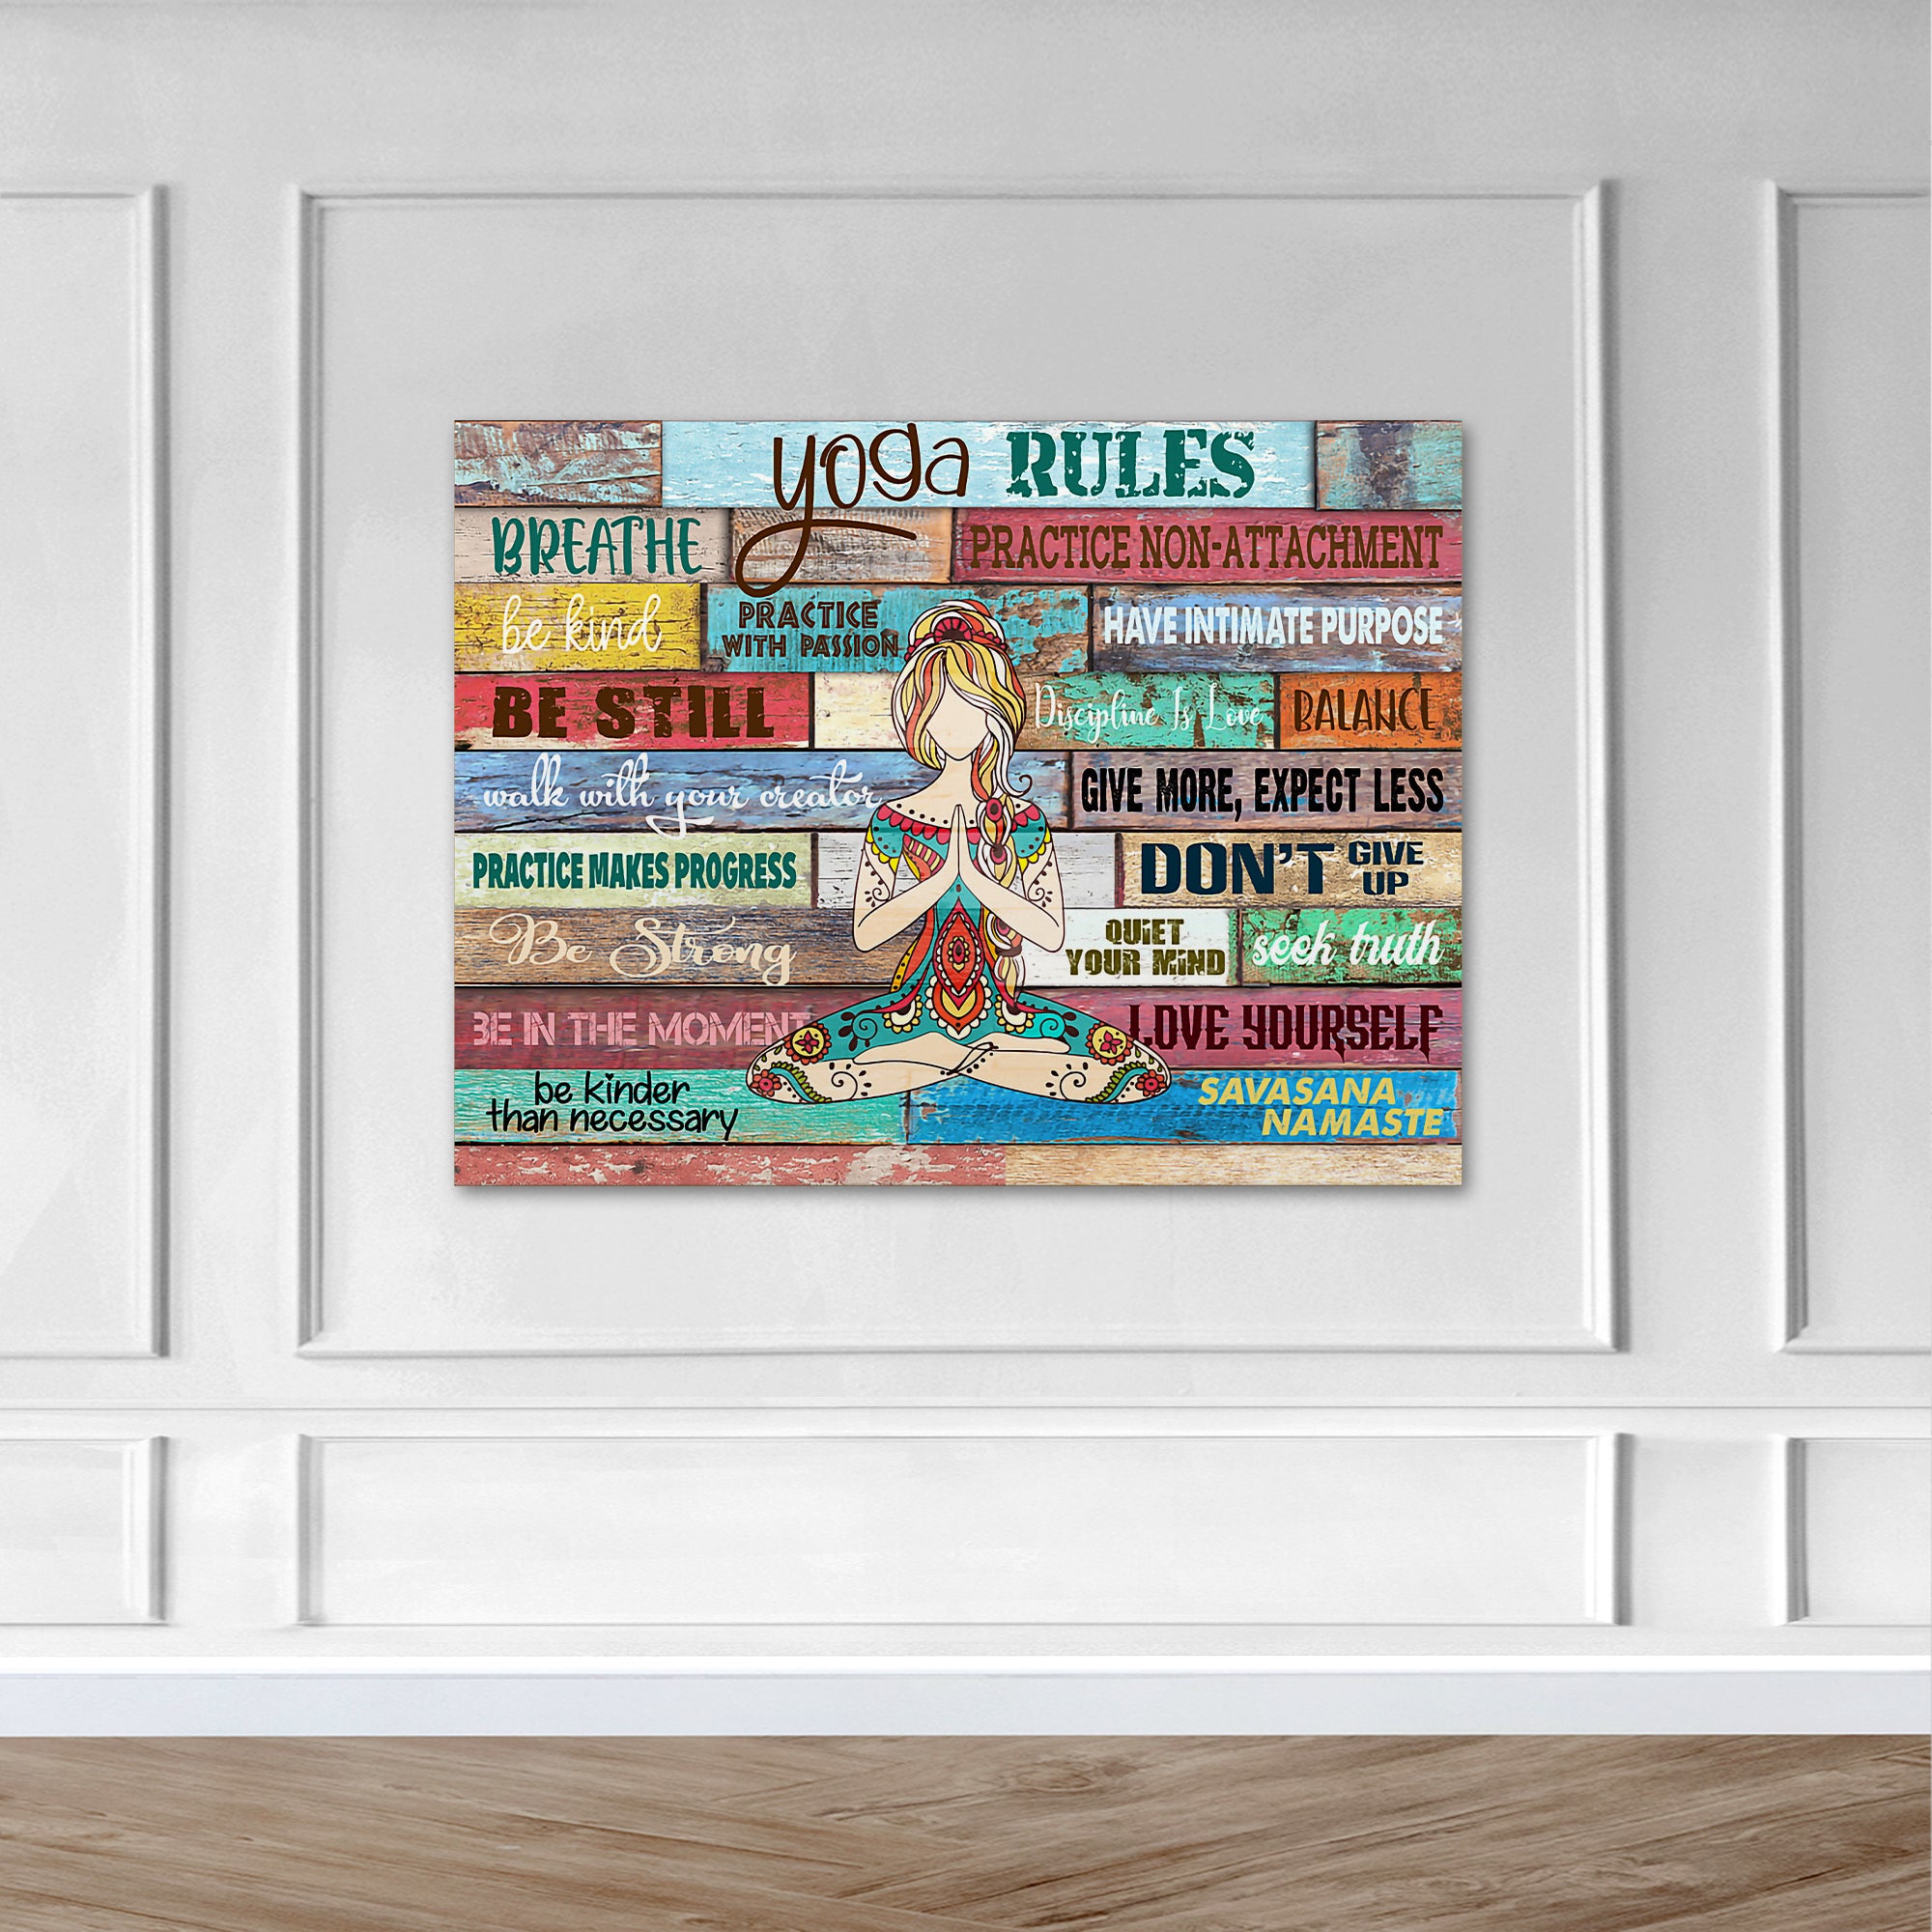 Yoga Rules With Passions Wrapped Canvas